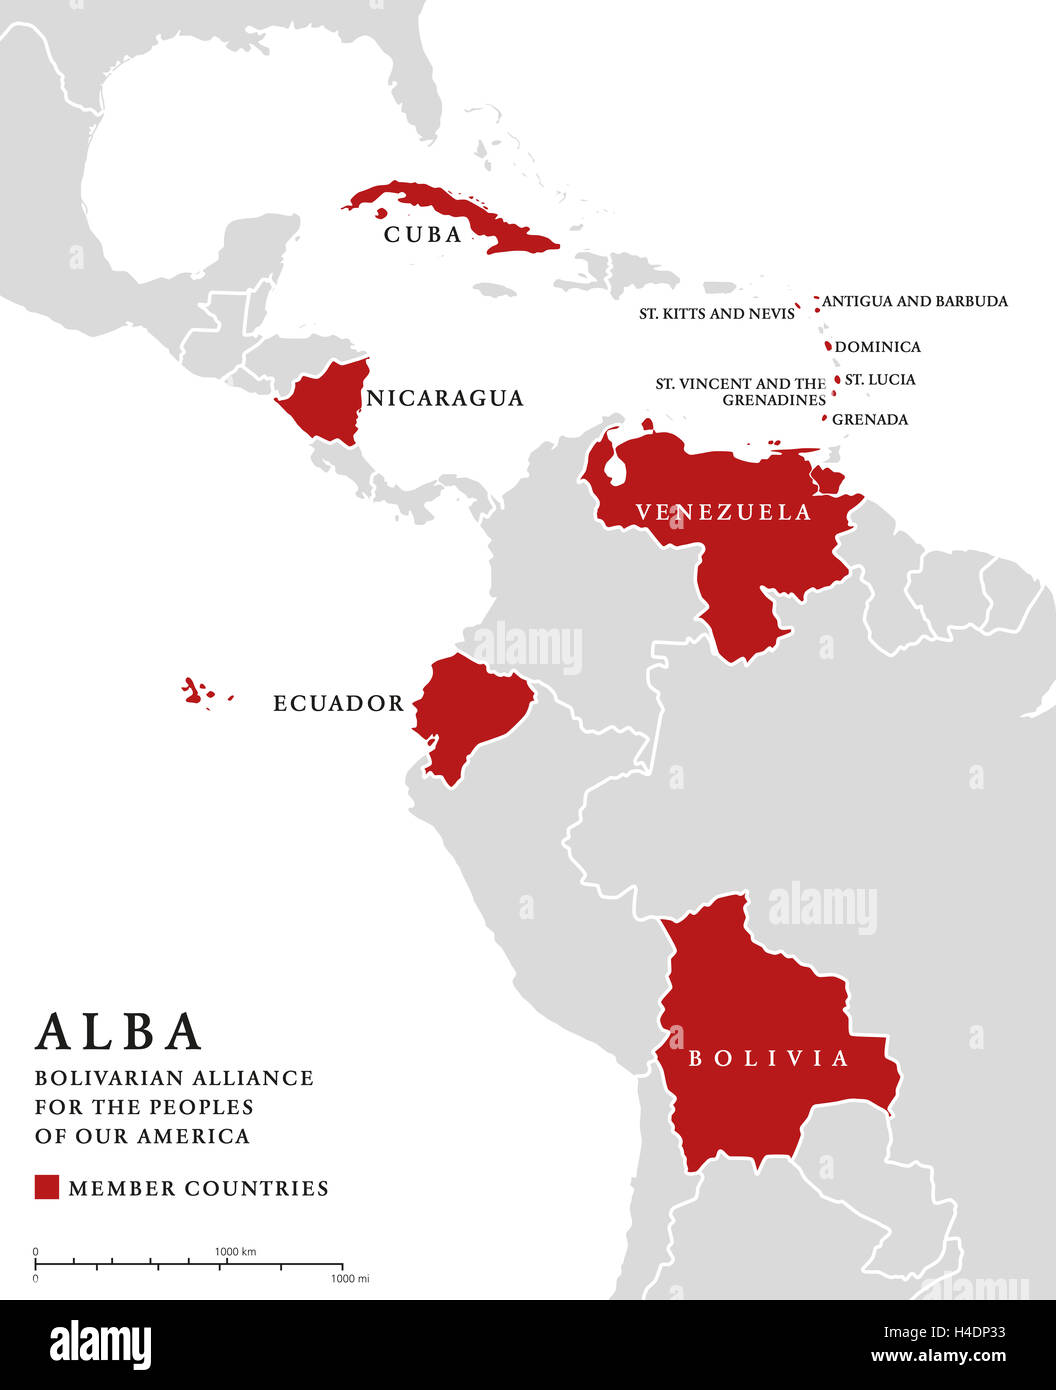 ALBA, member countries info map. Bolivarian Alliance for the Peoples of Our America, an intergovernmental organization. Stock Photo